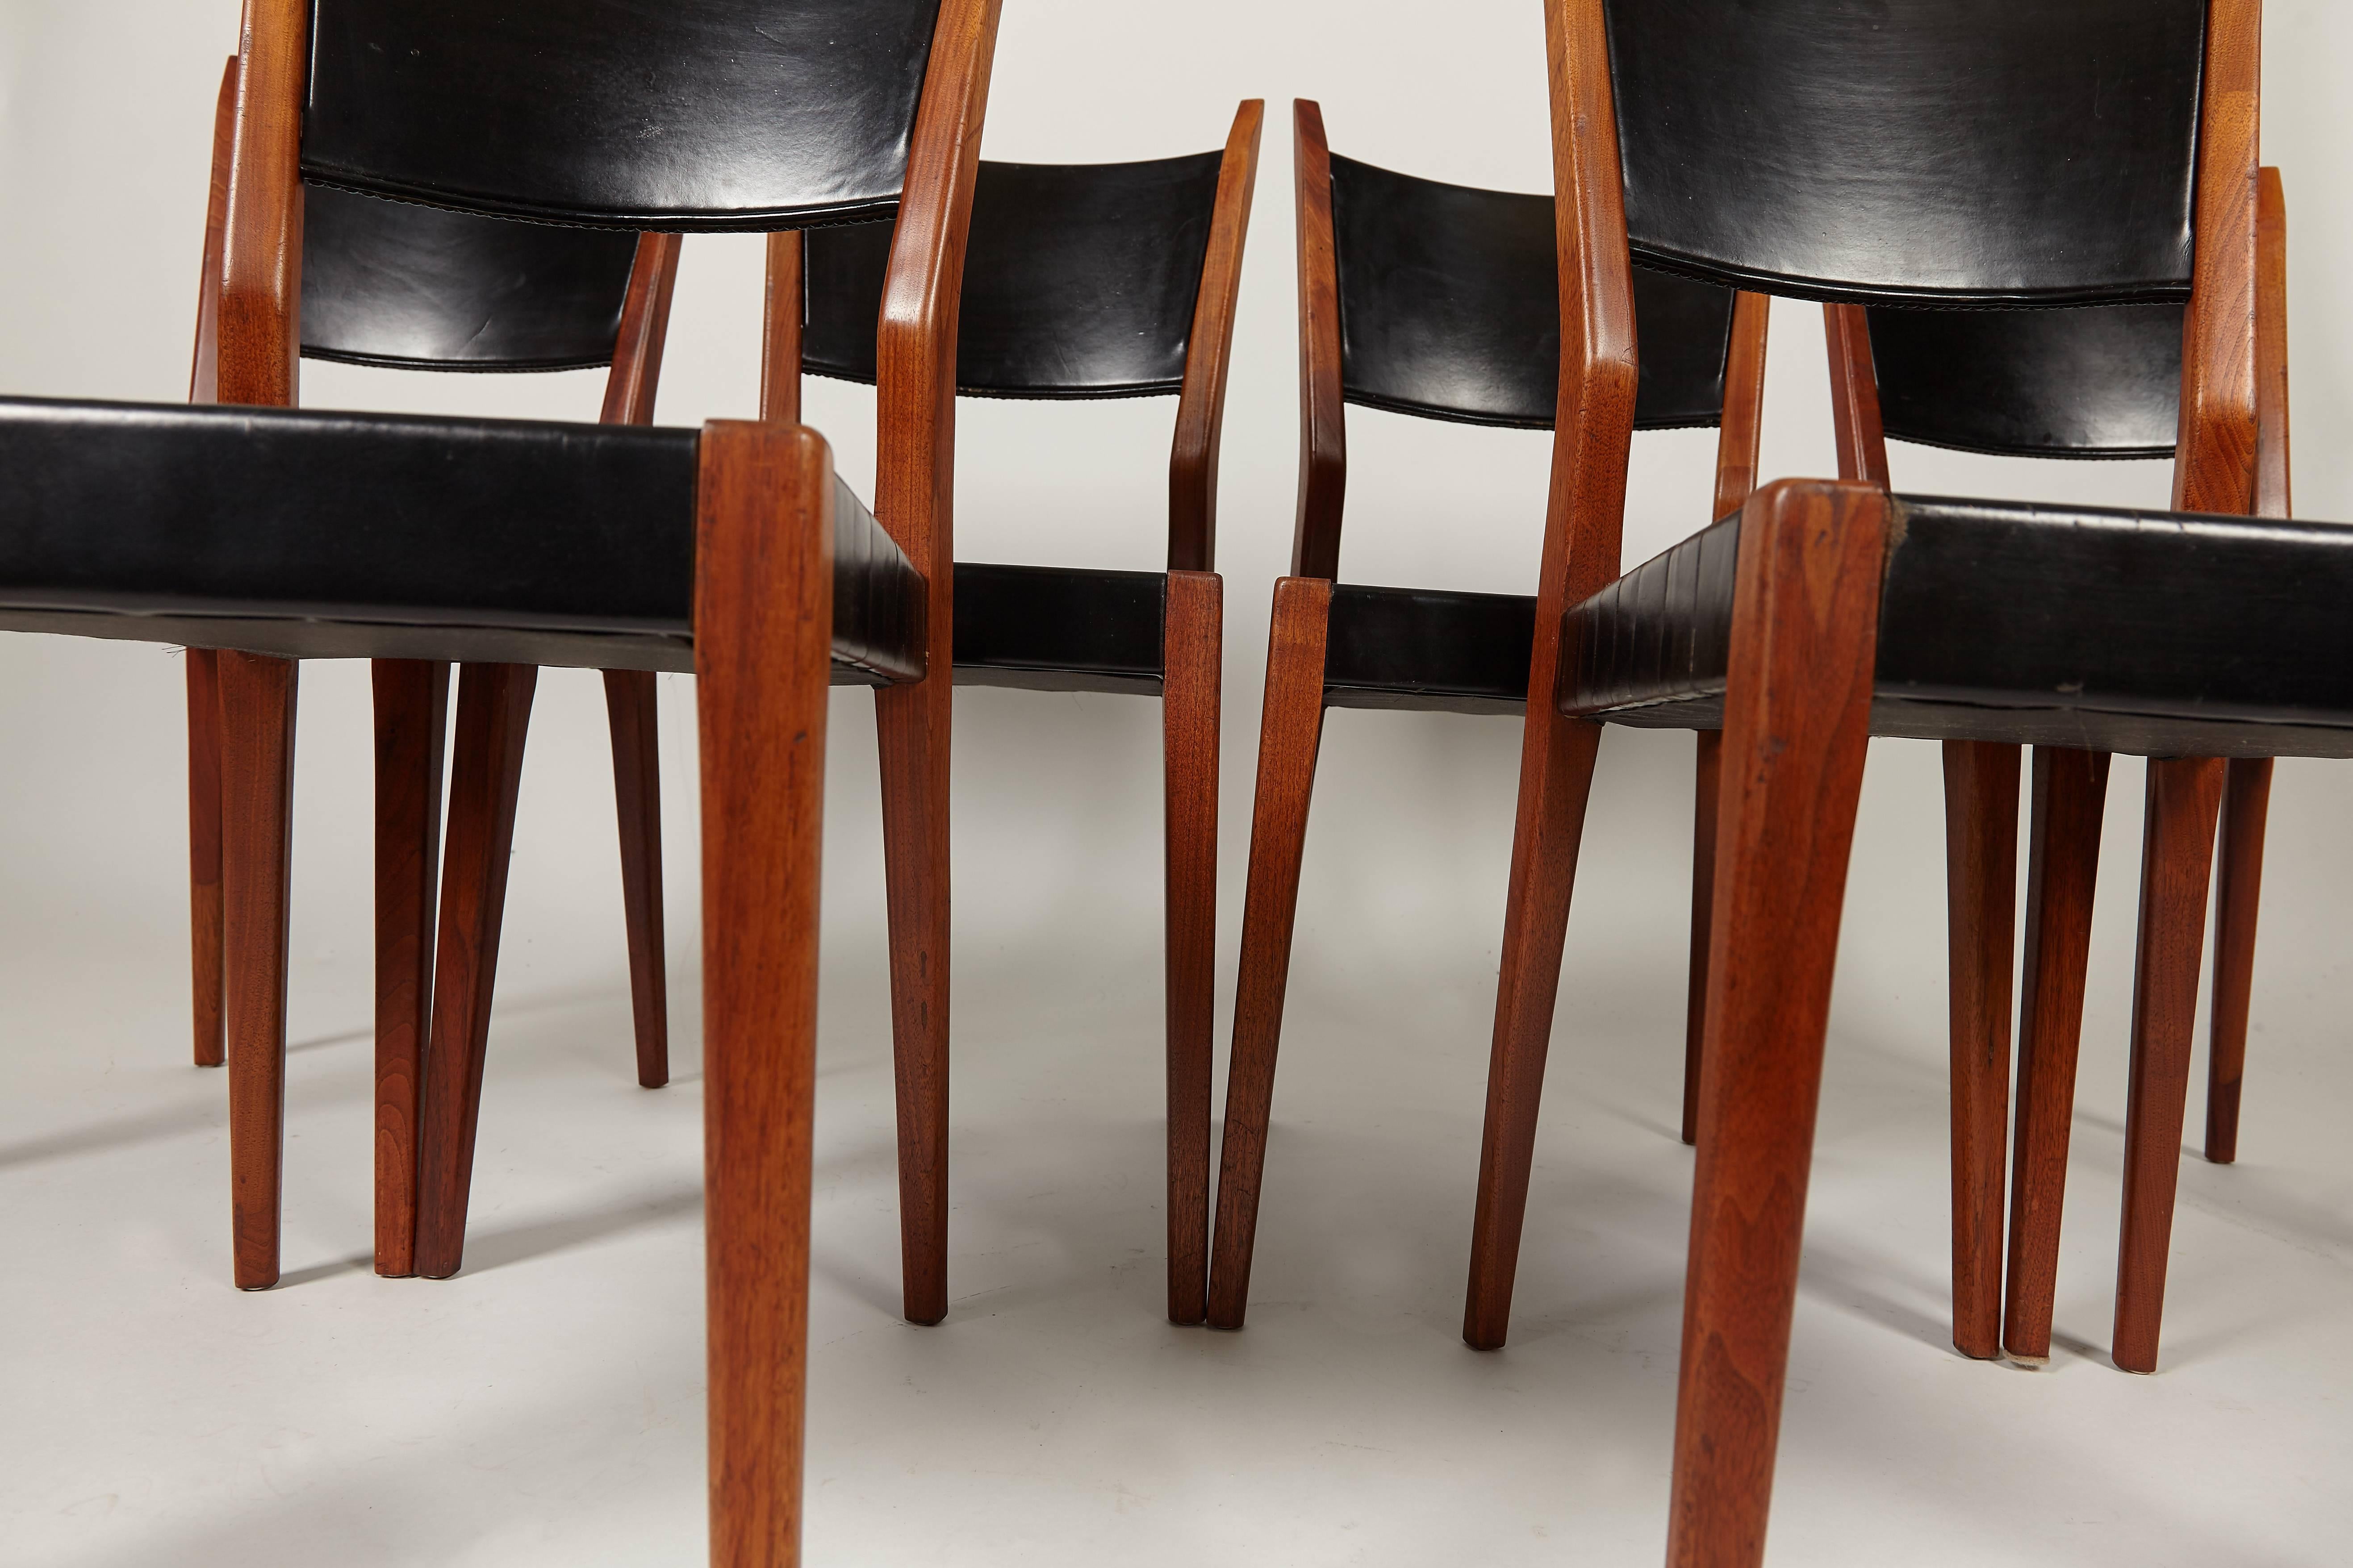 You are viewing one of the higher end manufacturing companies that produced Paul McCobb furniture, Calvin Mfg. Why we love these chairs, the beautiful patina that has graced them for over 50-plus years. 

Please take a closer look at the grain in